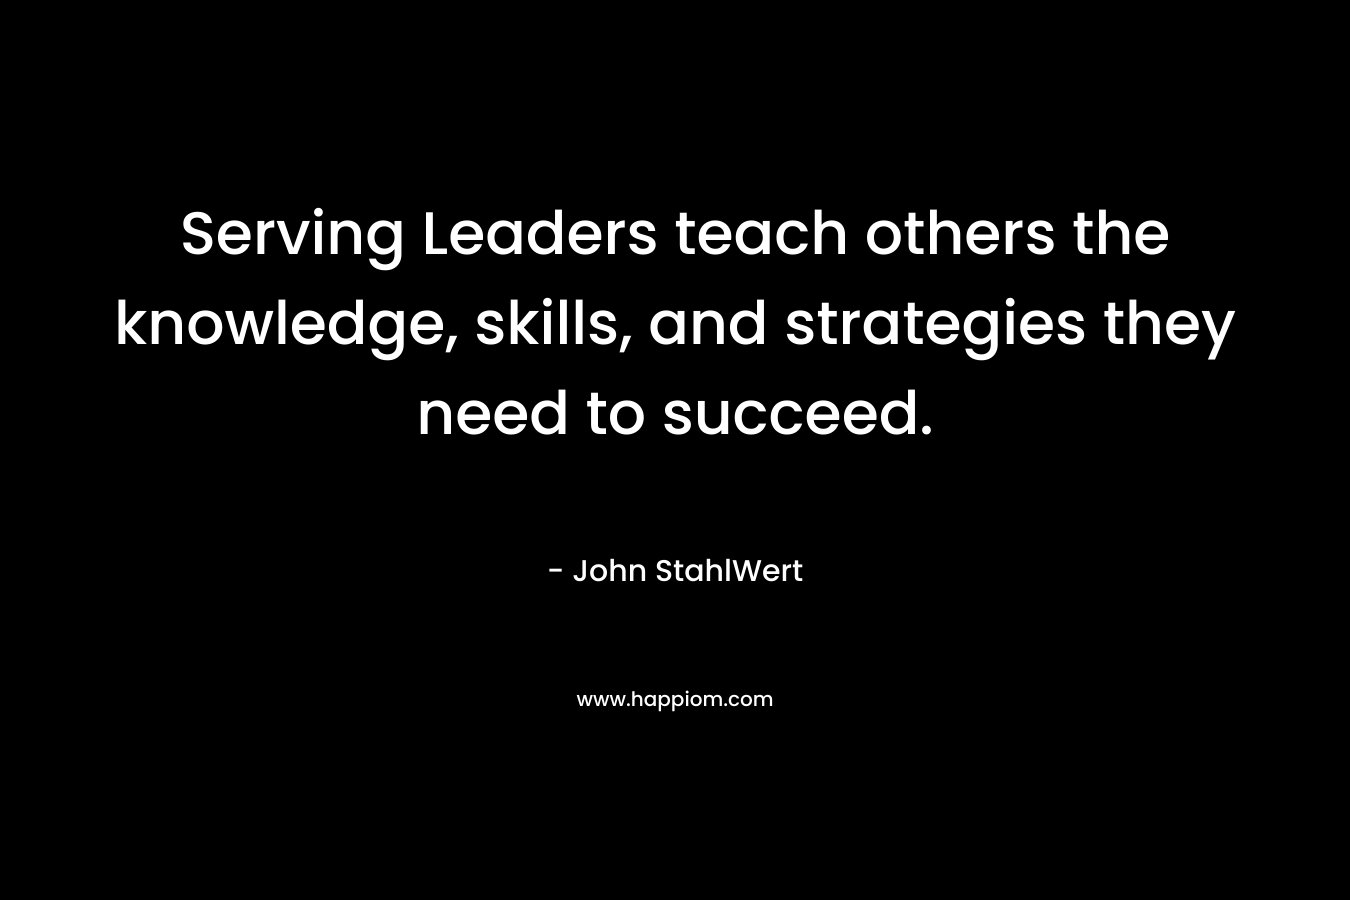 Serving Leaders teach others the knowledge, skills, and strategies they need to succeed. – John StahlWert